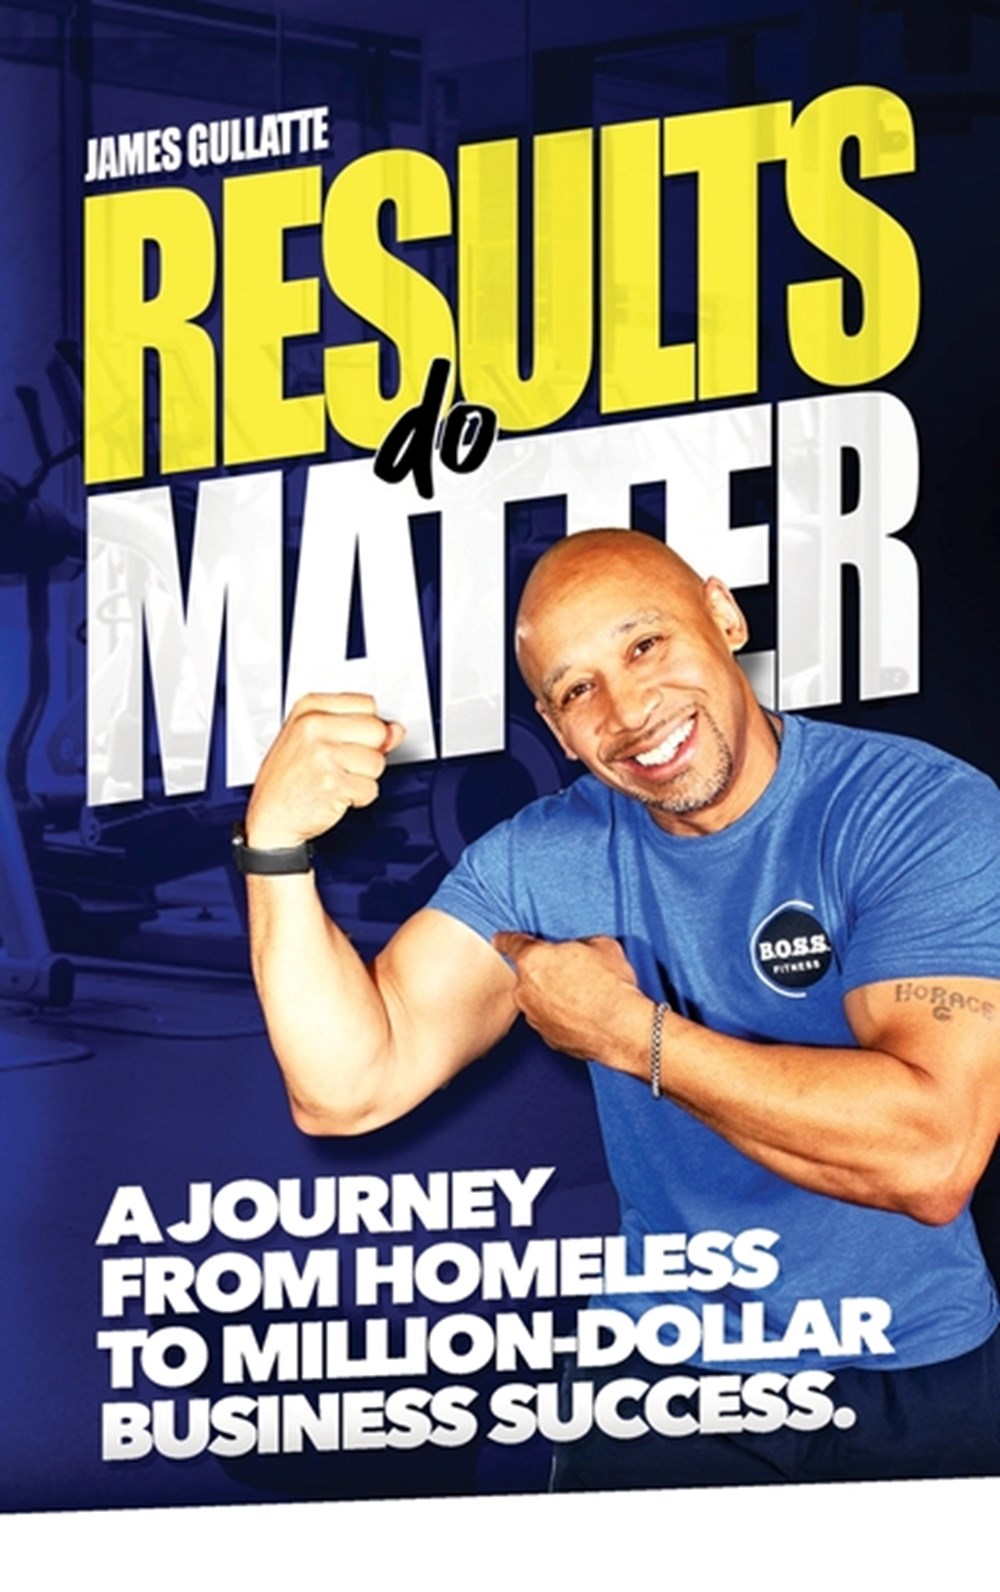 Results Do Matter: A Journey from Homeless to Million-Dollar Business Success